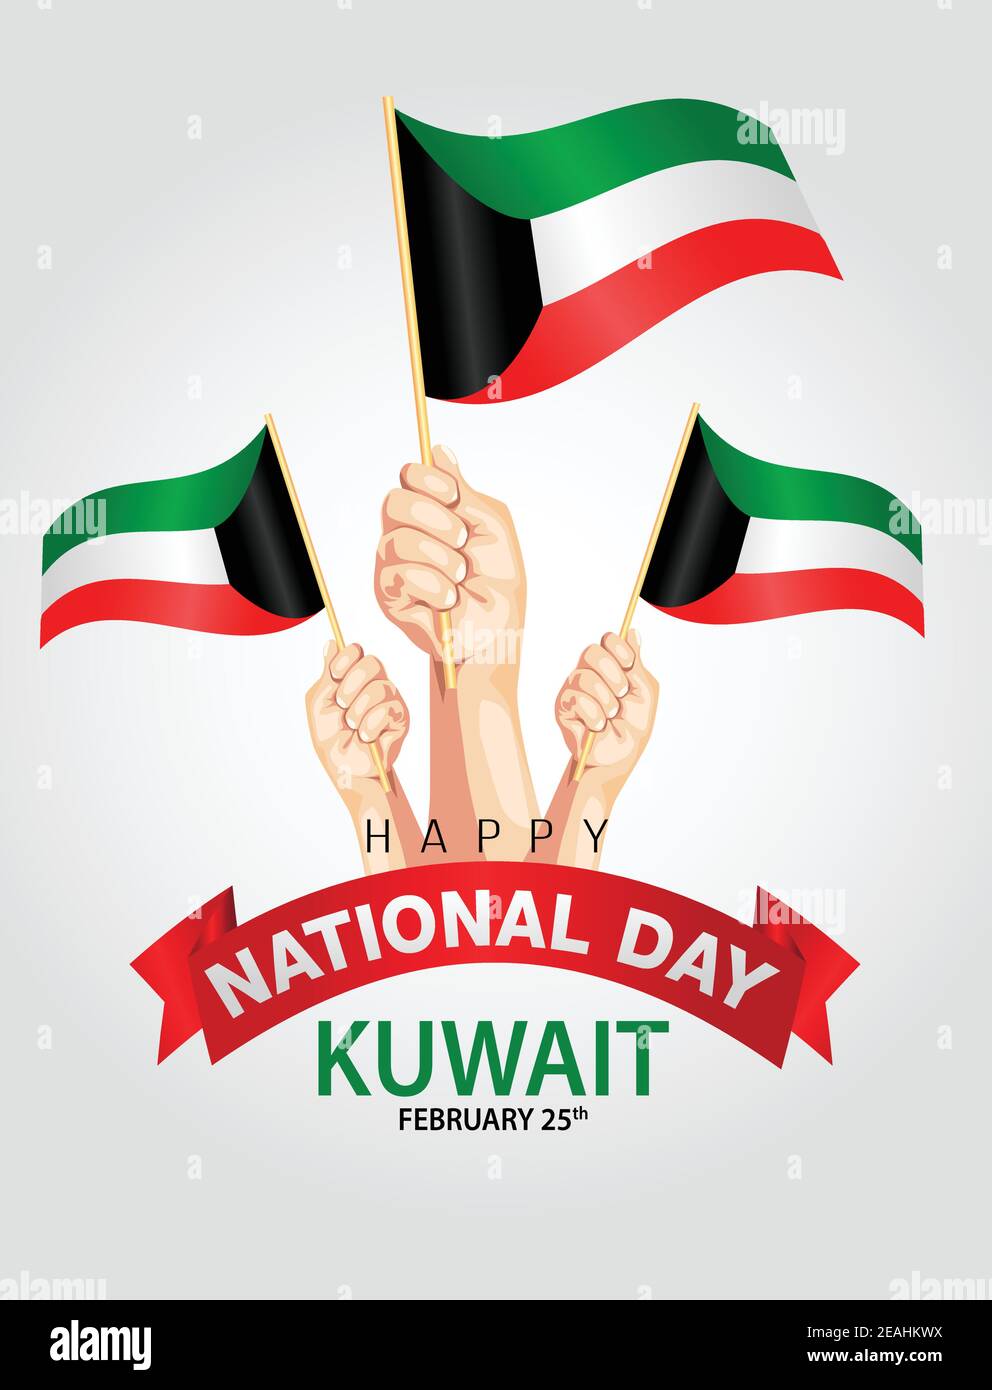 Kuwait national day25th February with hand holding flags. vector illustration design Stock Vector